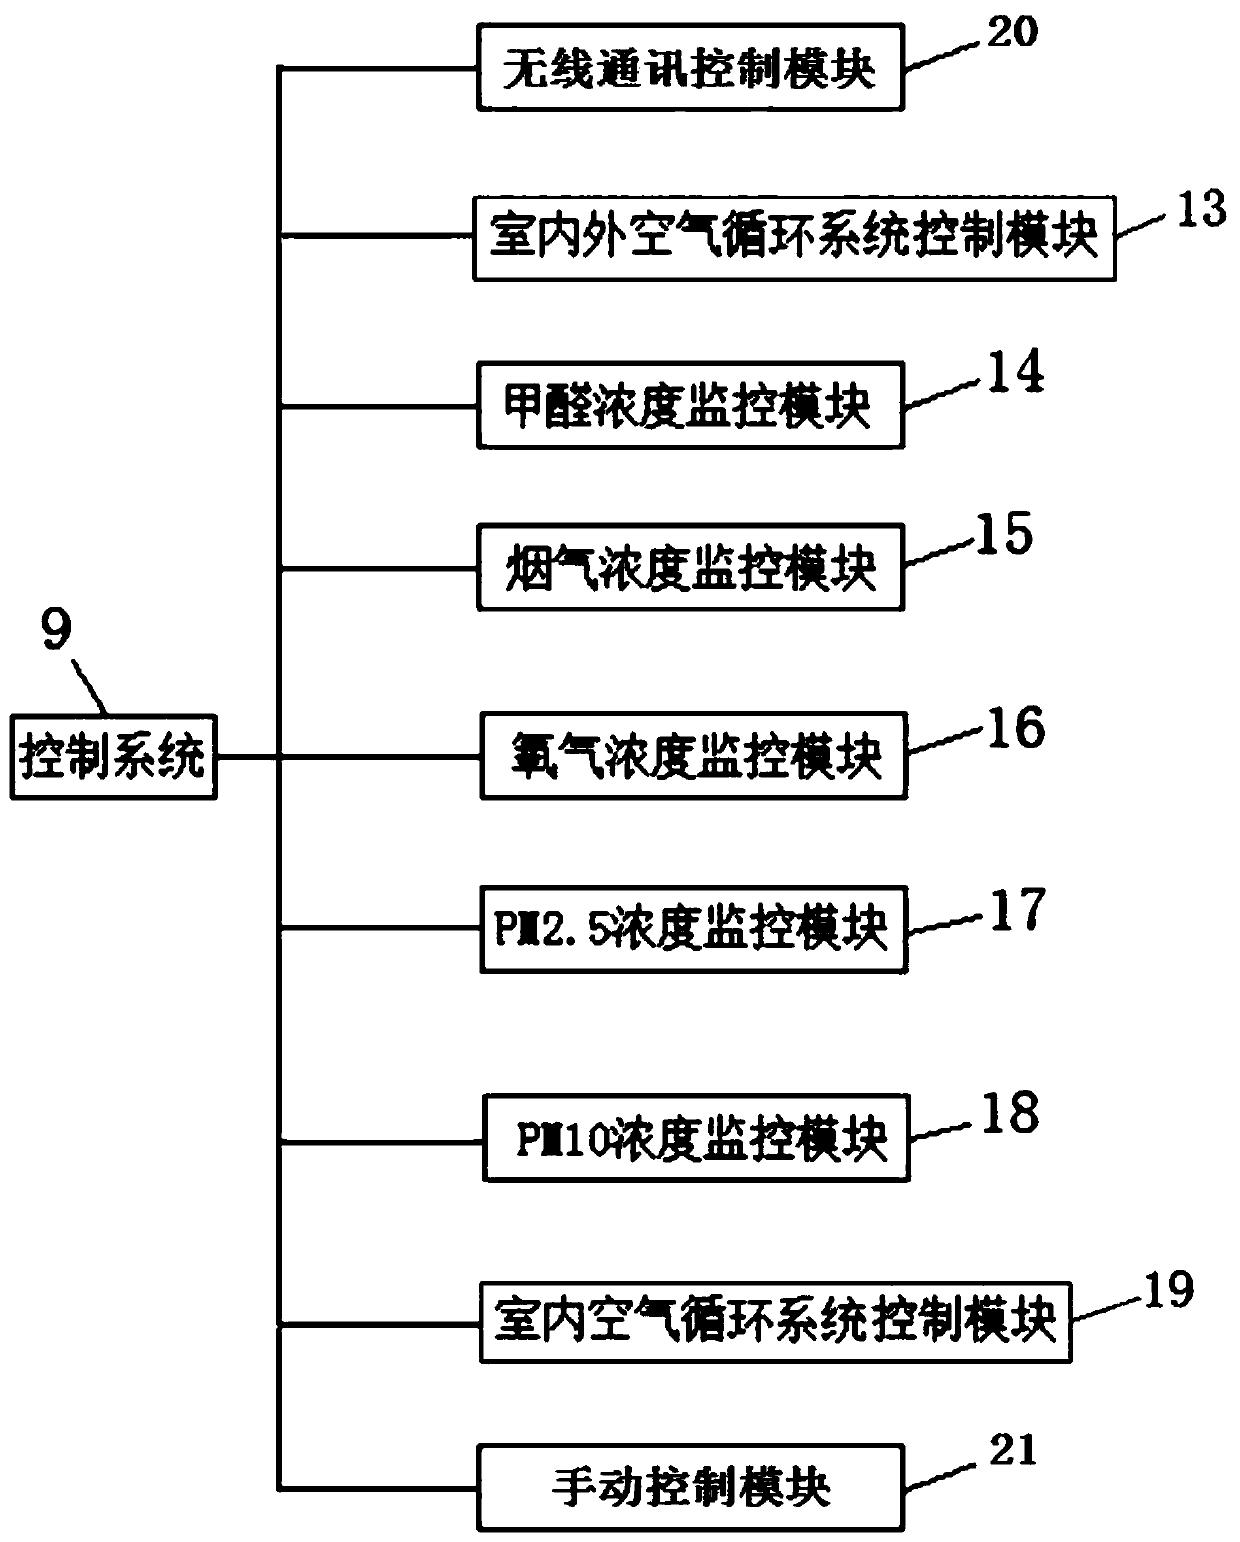 Indoor ambient air purification system and method